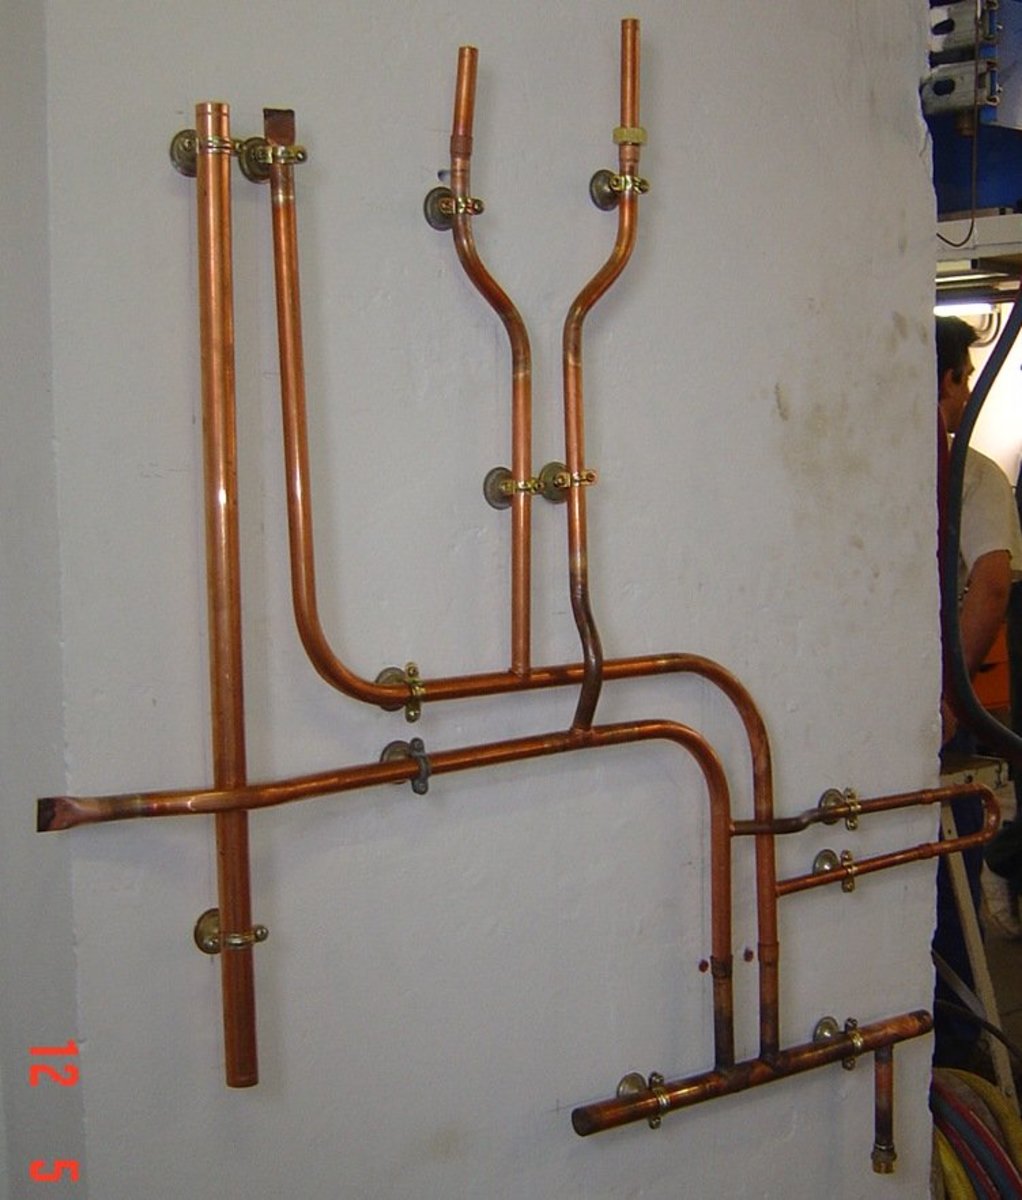 How To Bend A Copper Pipe With And Without Plumbing Tools Dengarden